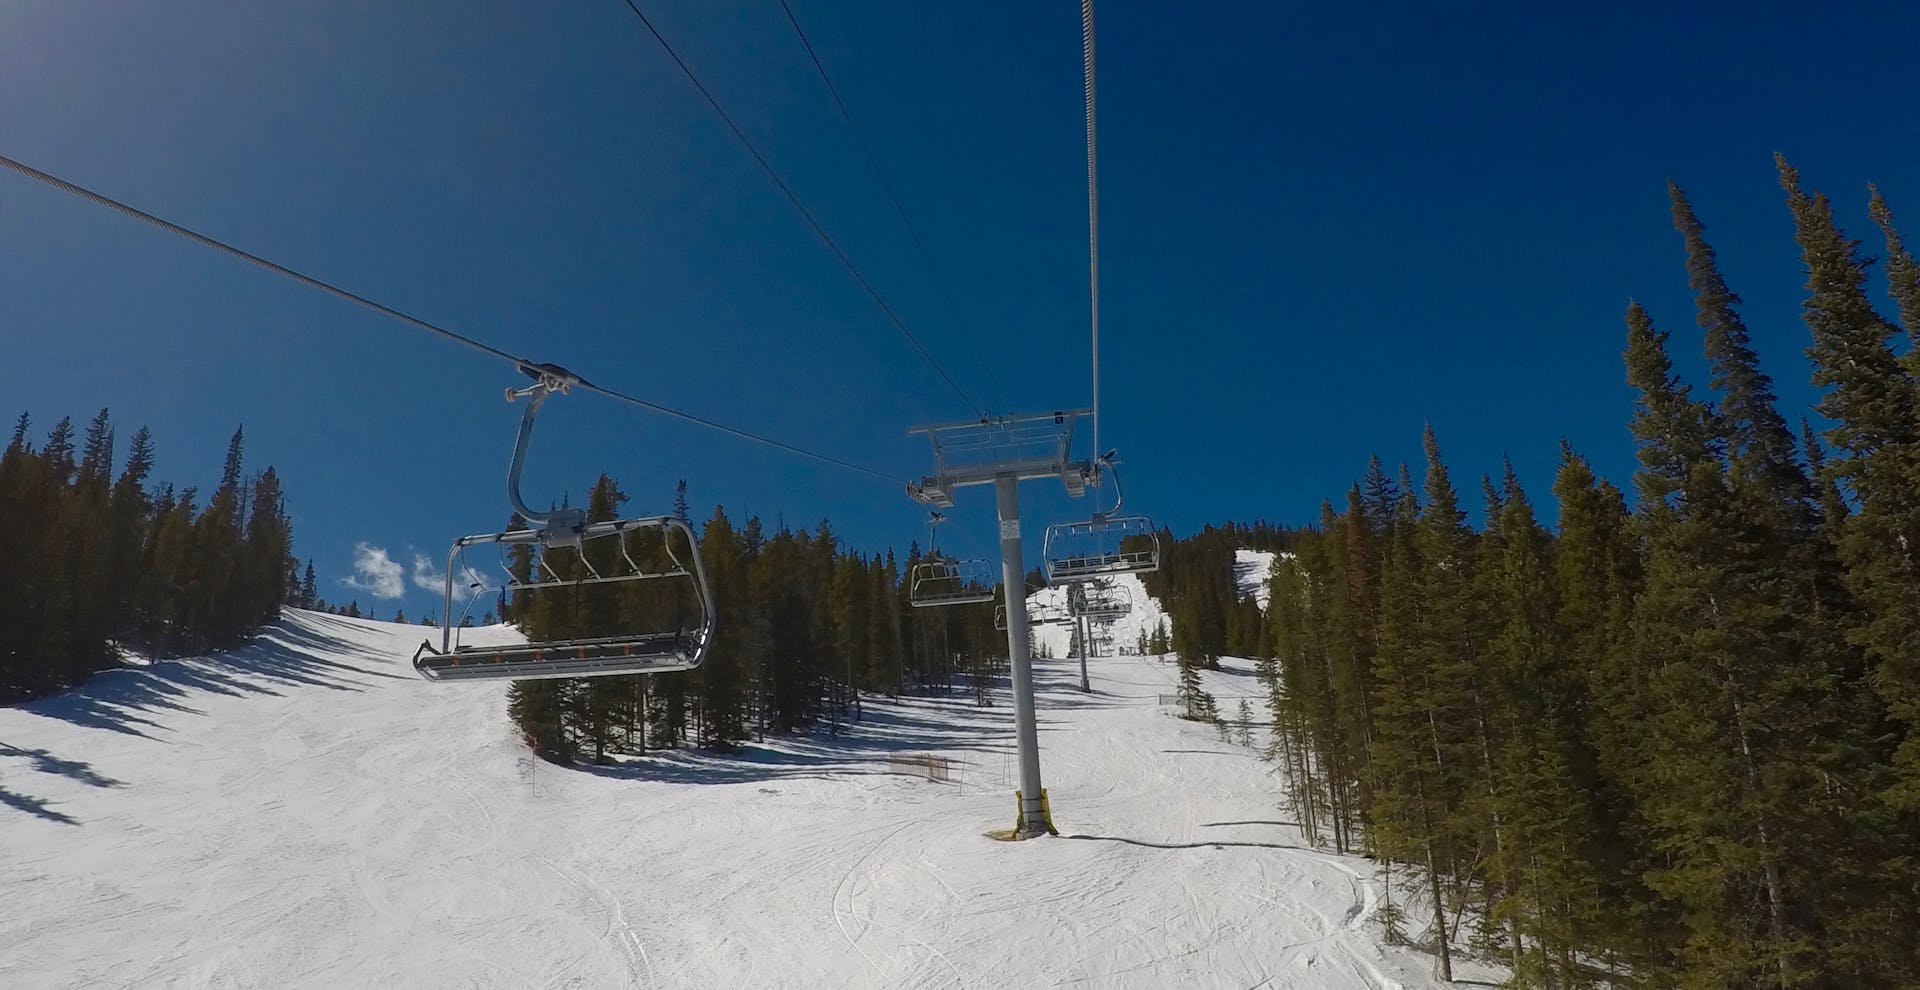 Eldora Mountain and chairlift